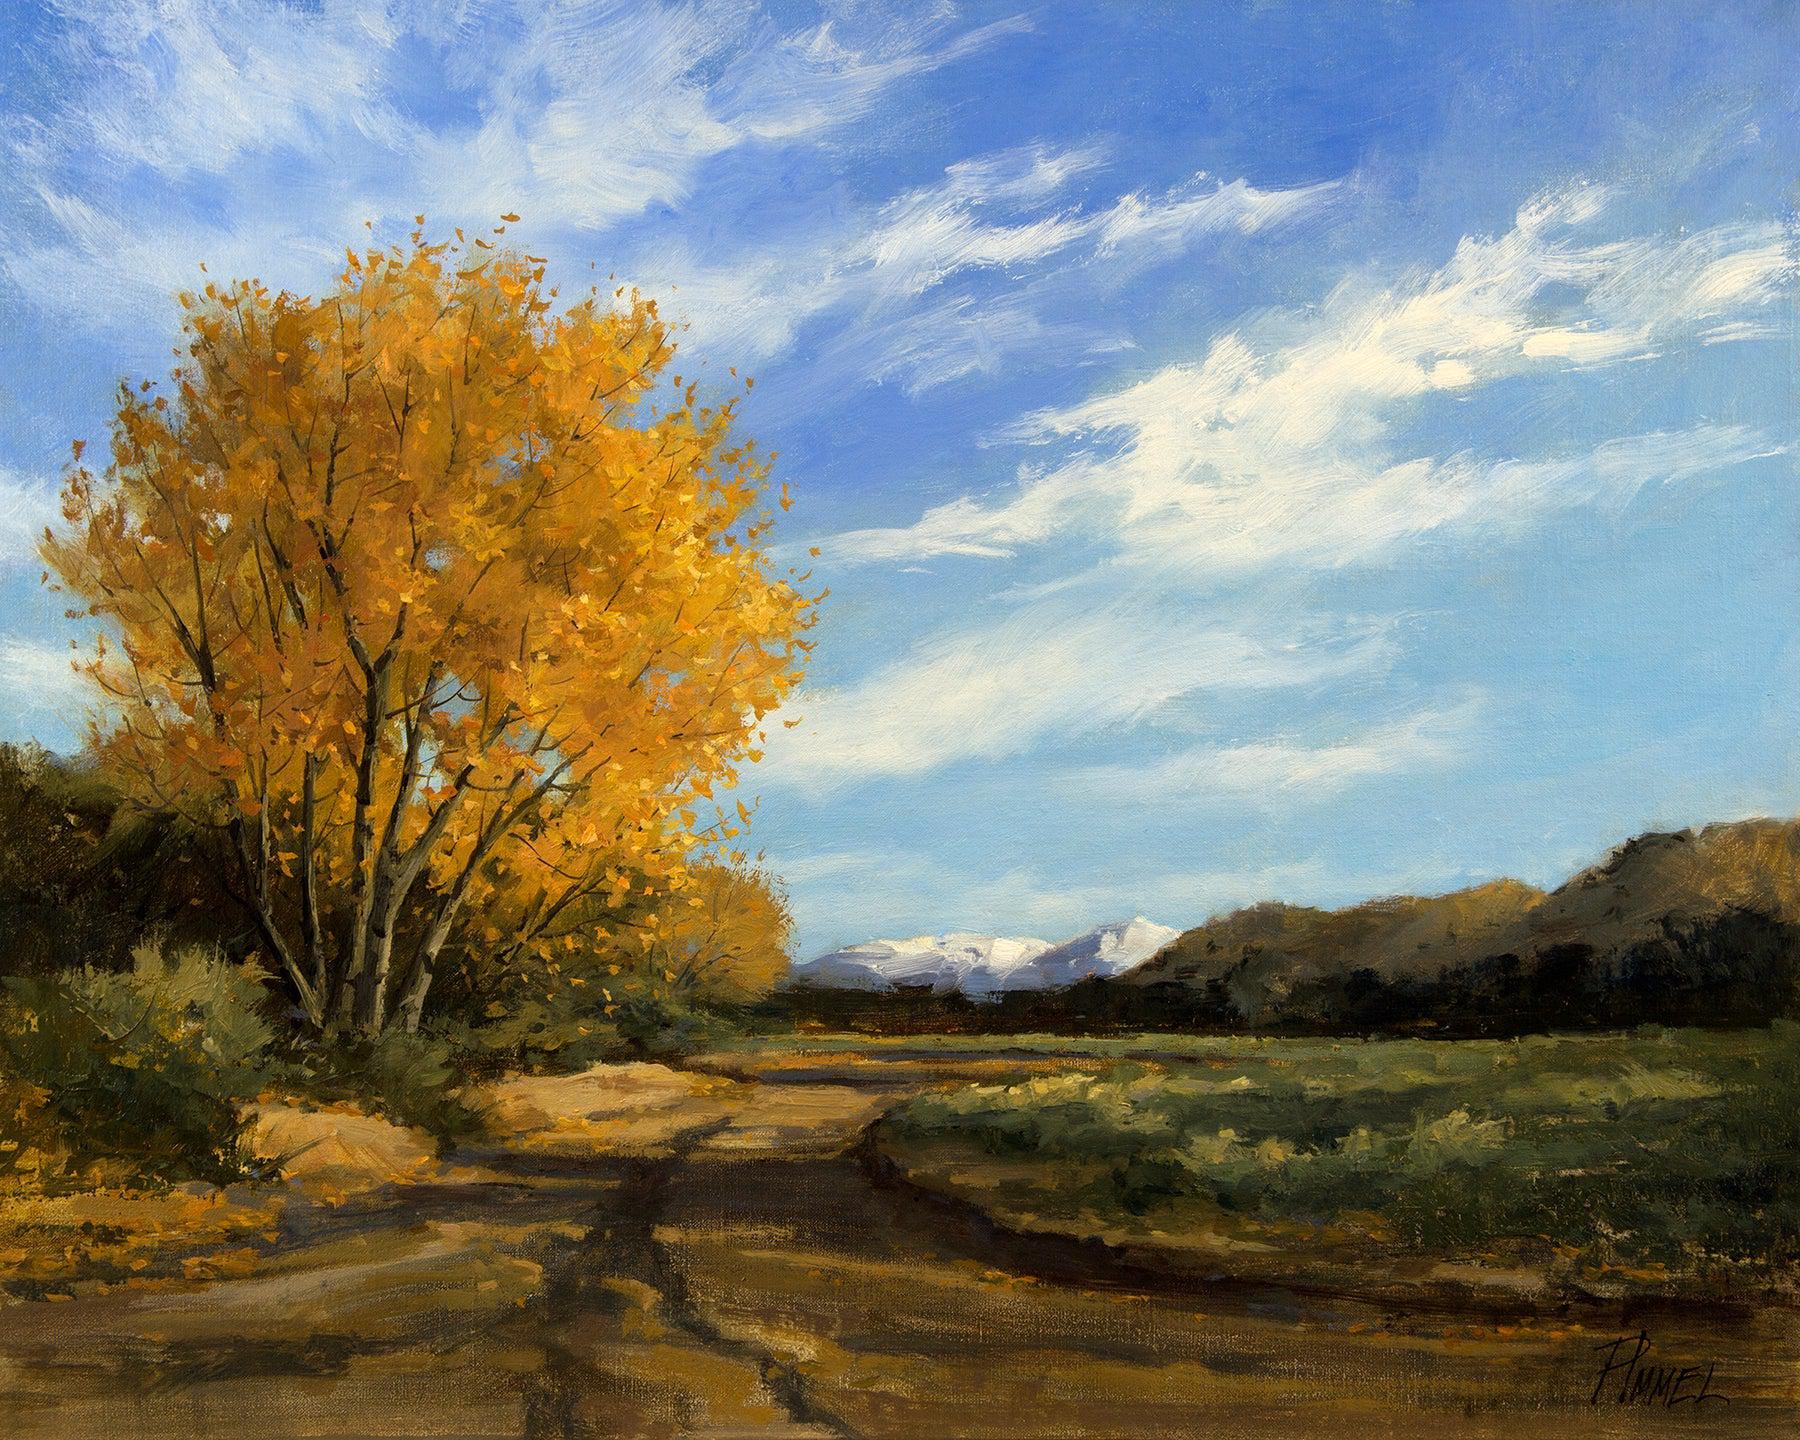 Up a Dry Creek Bed-Painting-Peggy Immel-Sorrel Sky Gallery